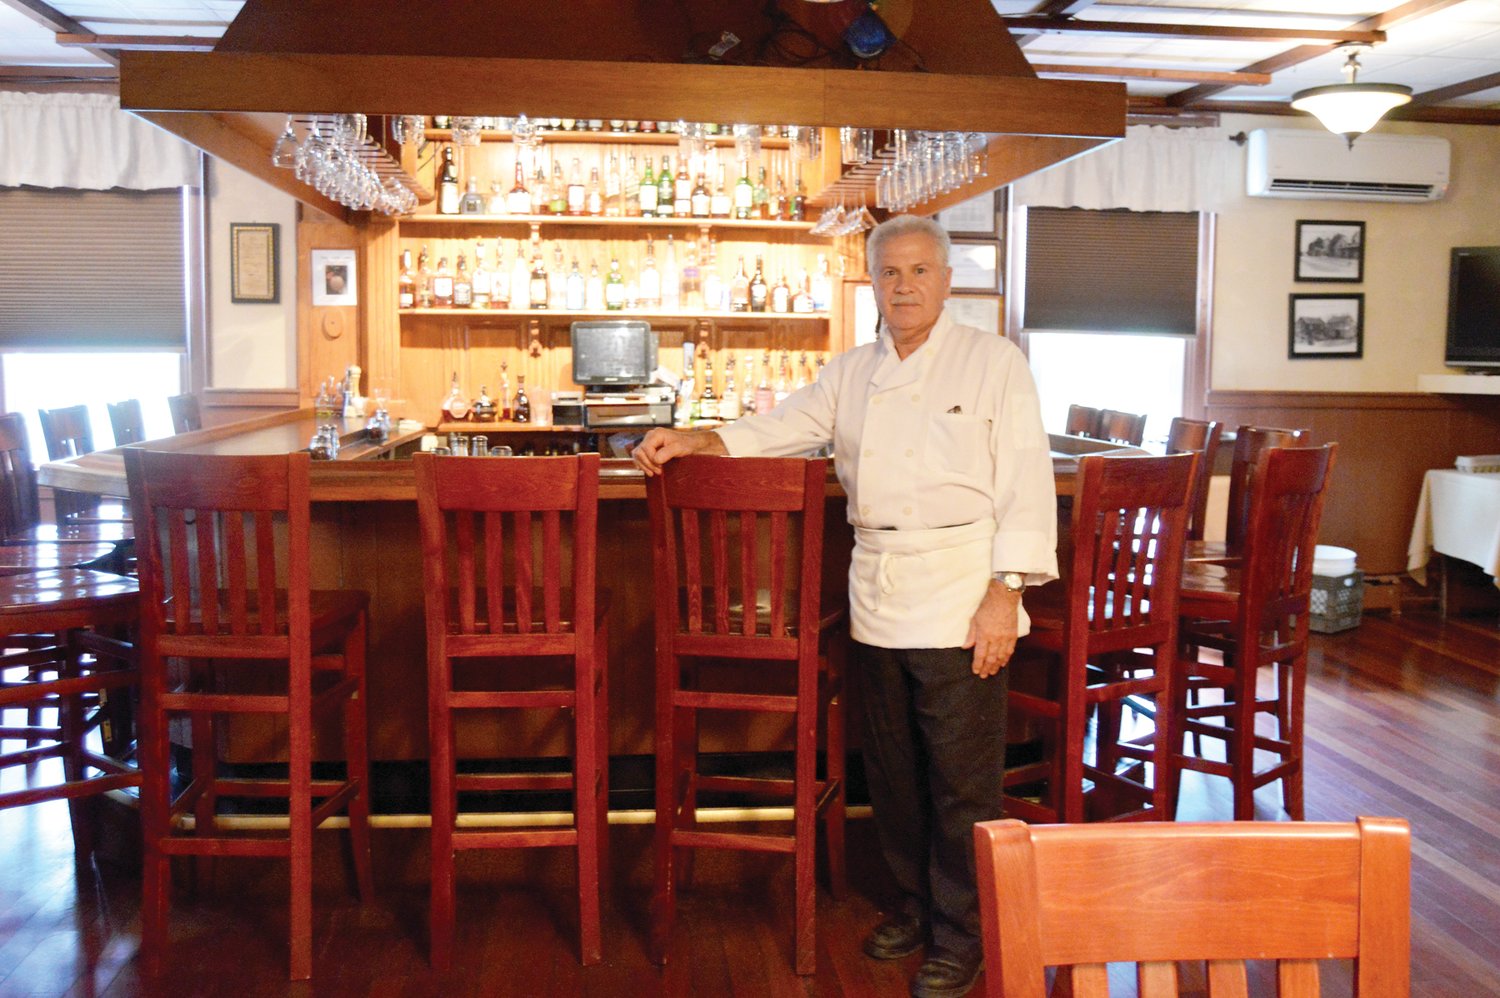 Filippo Magnano took over the Ottsville Inn nearly 13 years ago and made it into a family-friendly Italian restaurant. Photograph by Susan S. Yeske